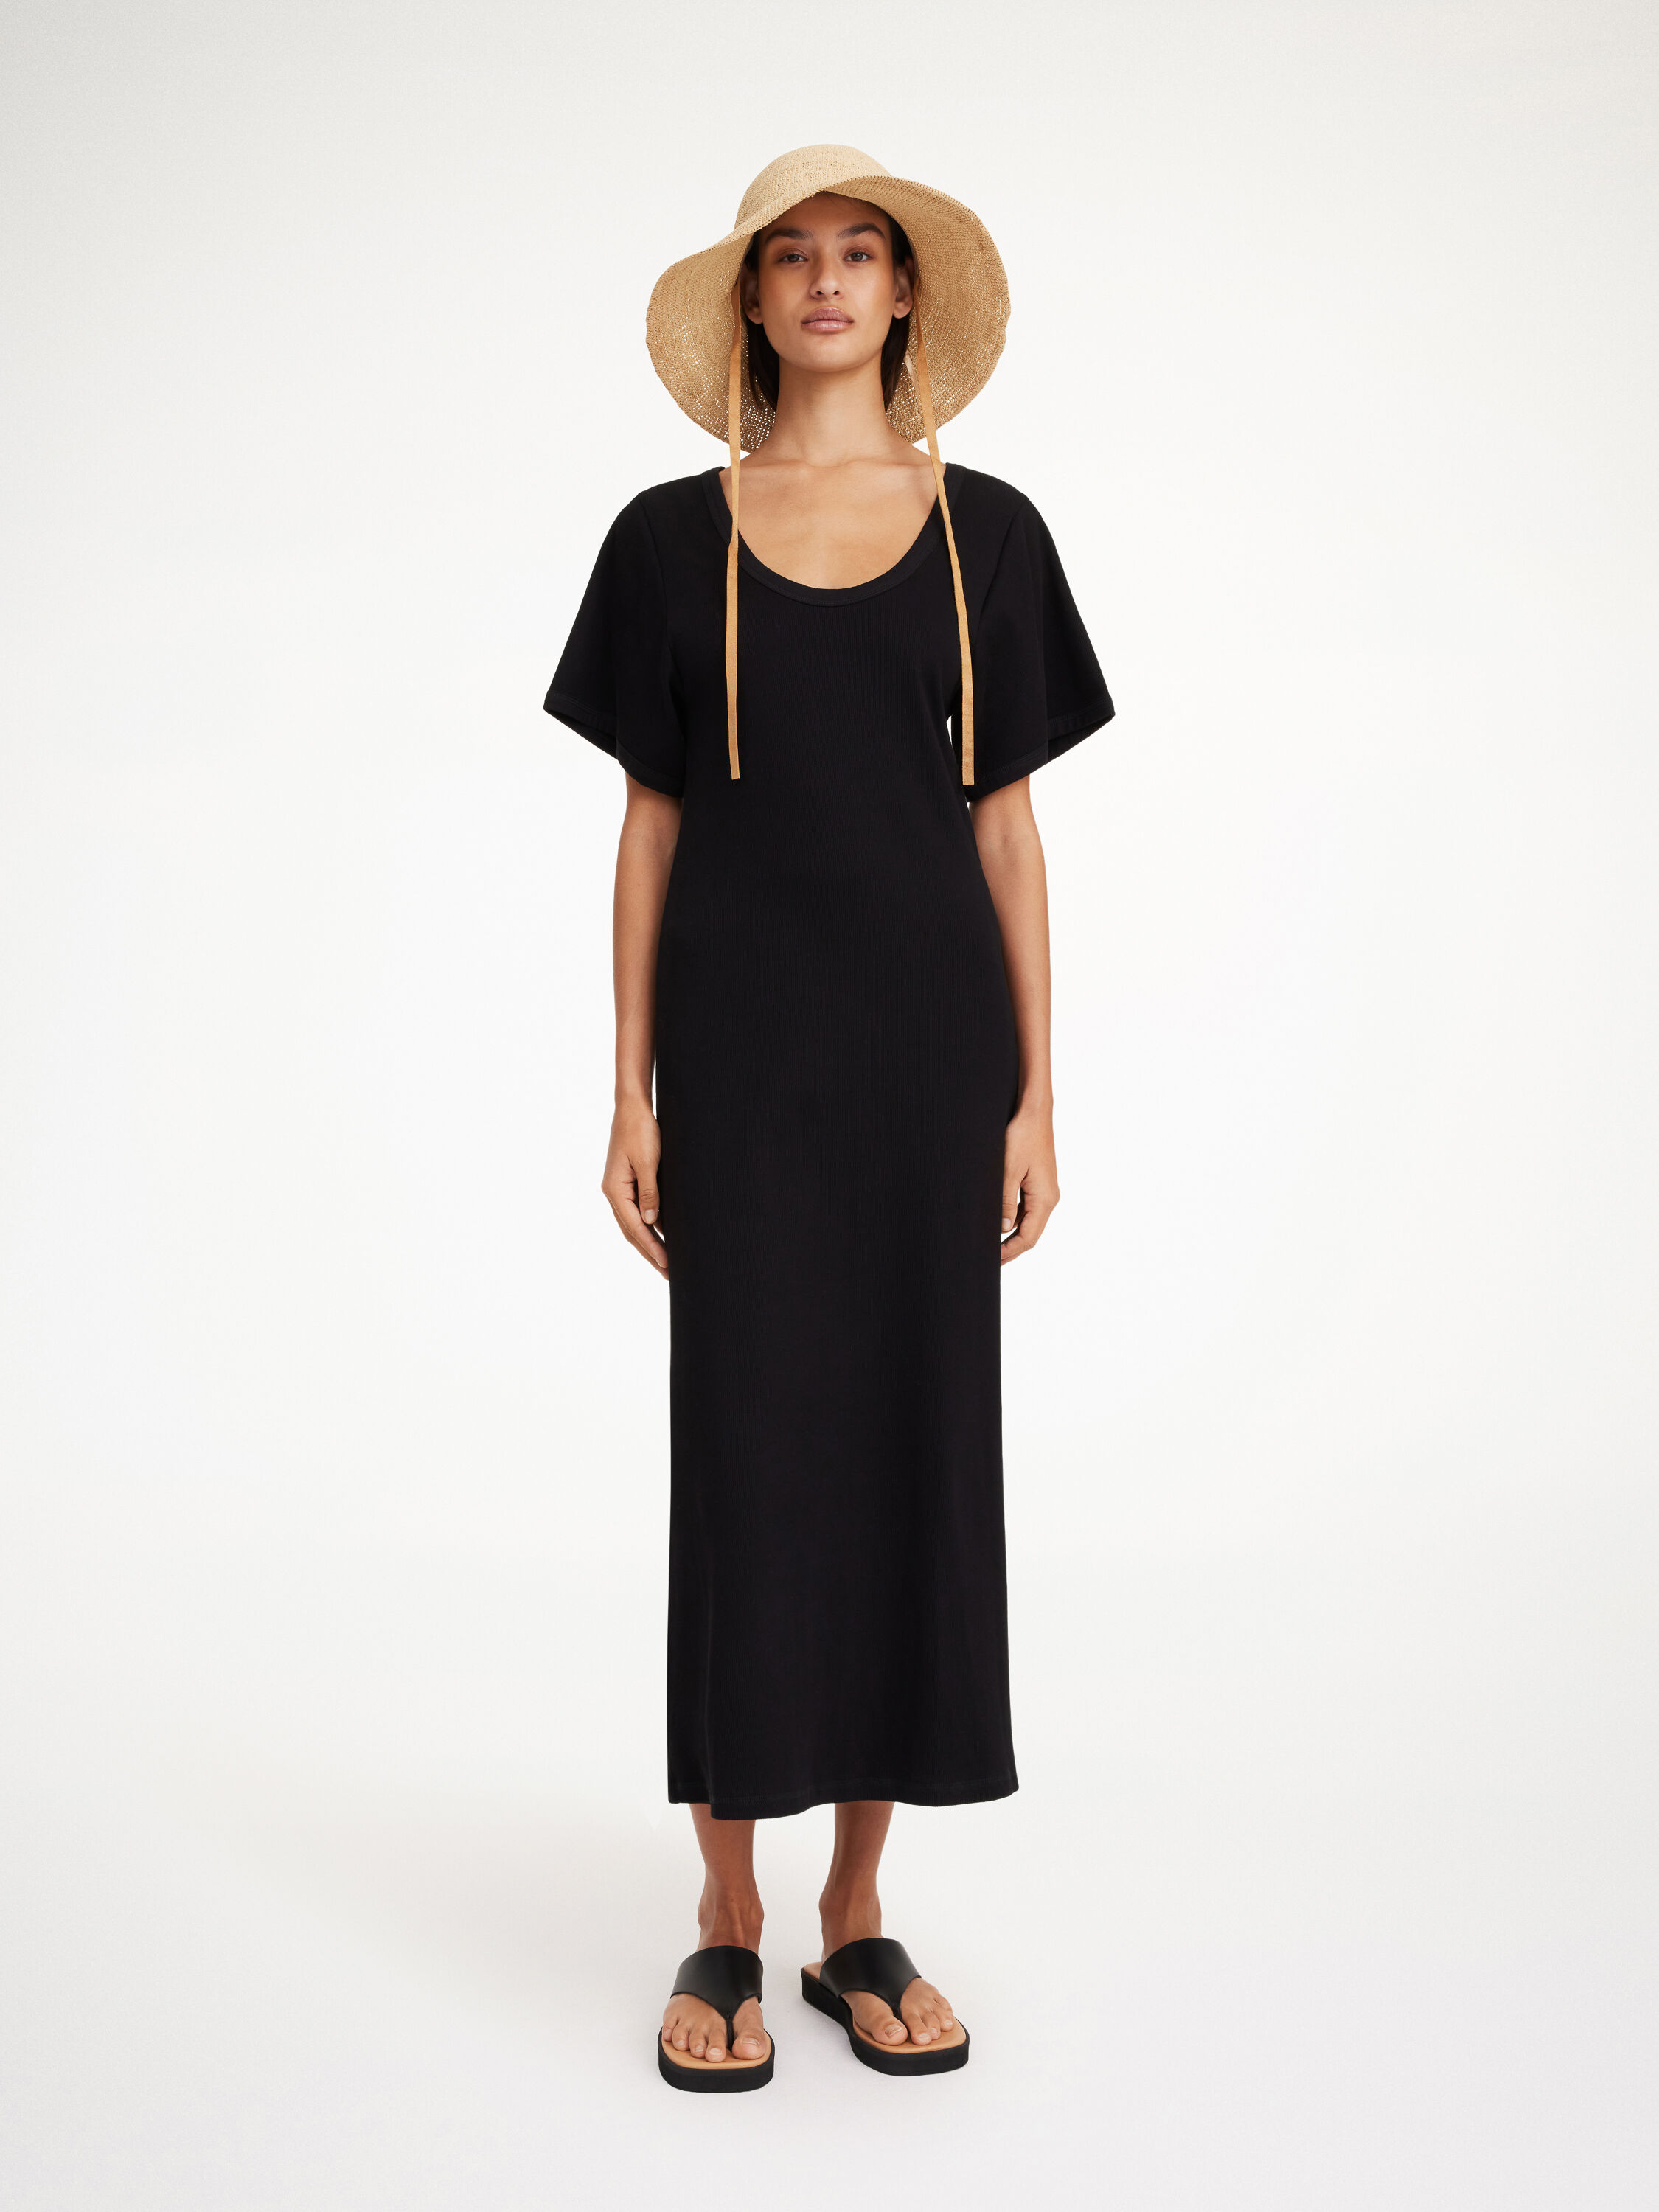 Dresses | Explore all styles here | By Malene Birger